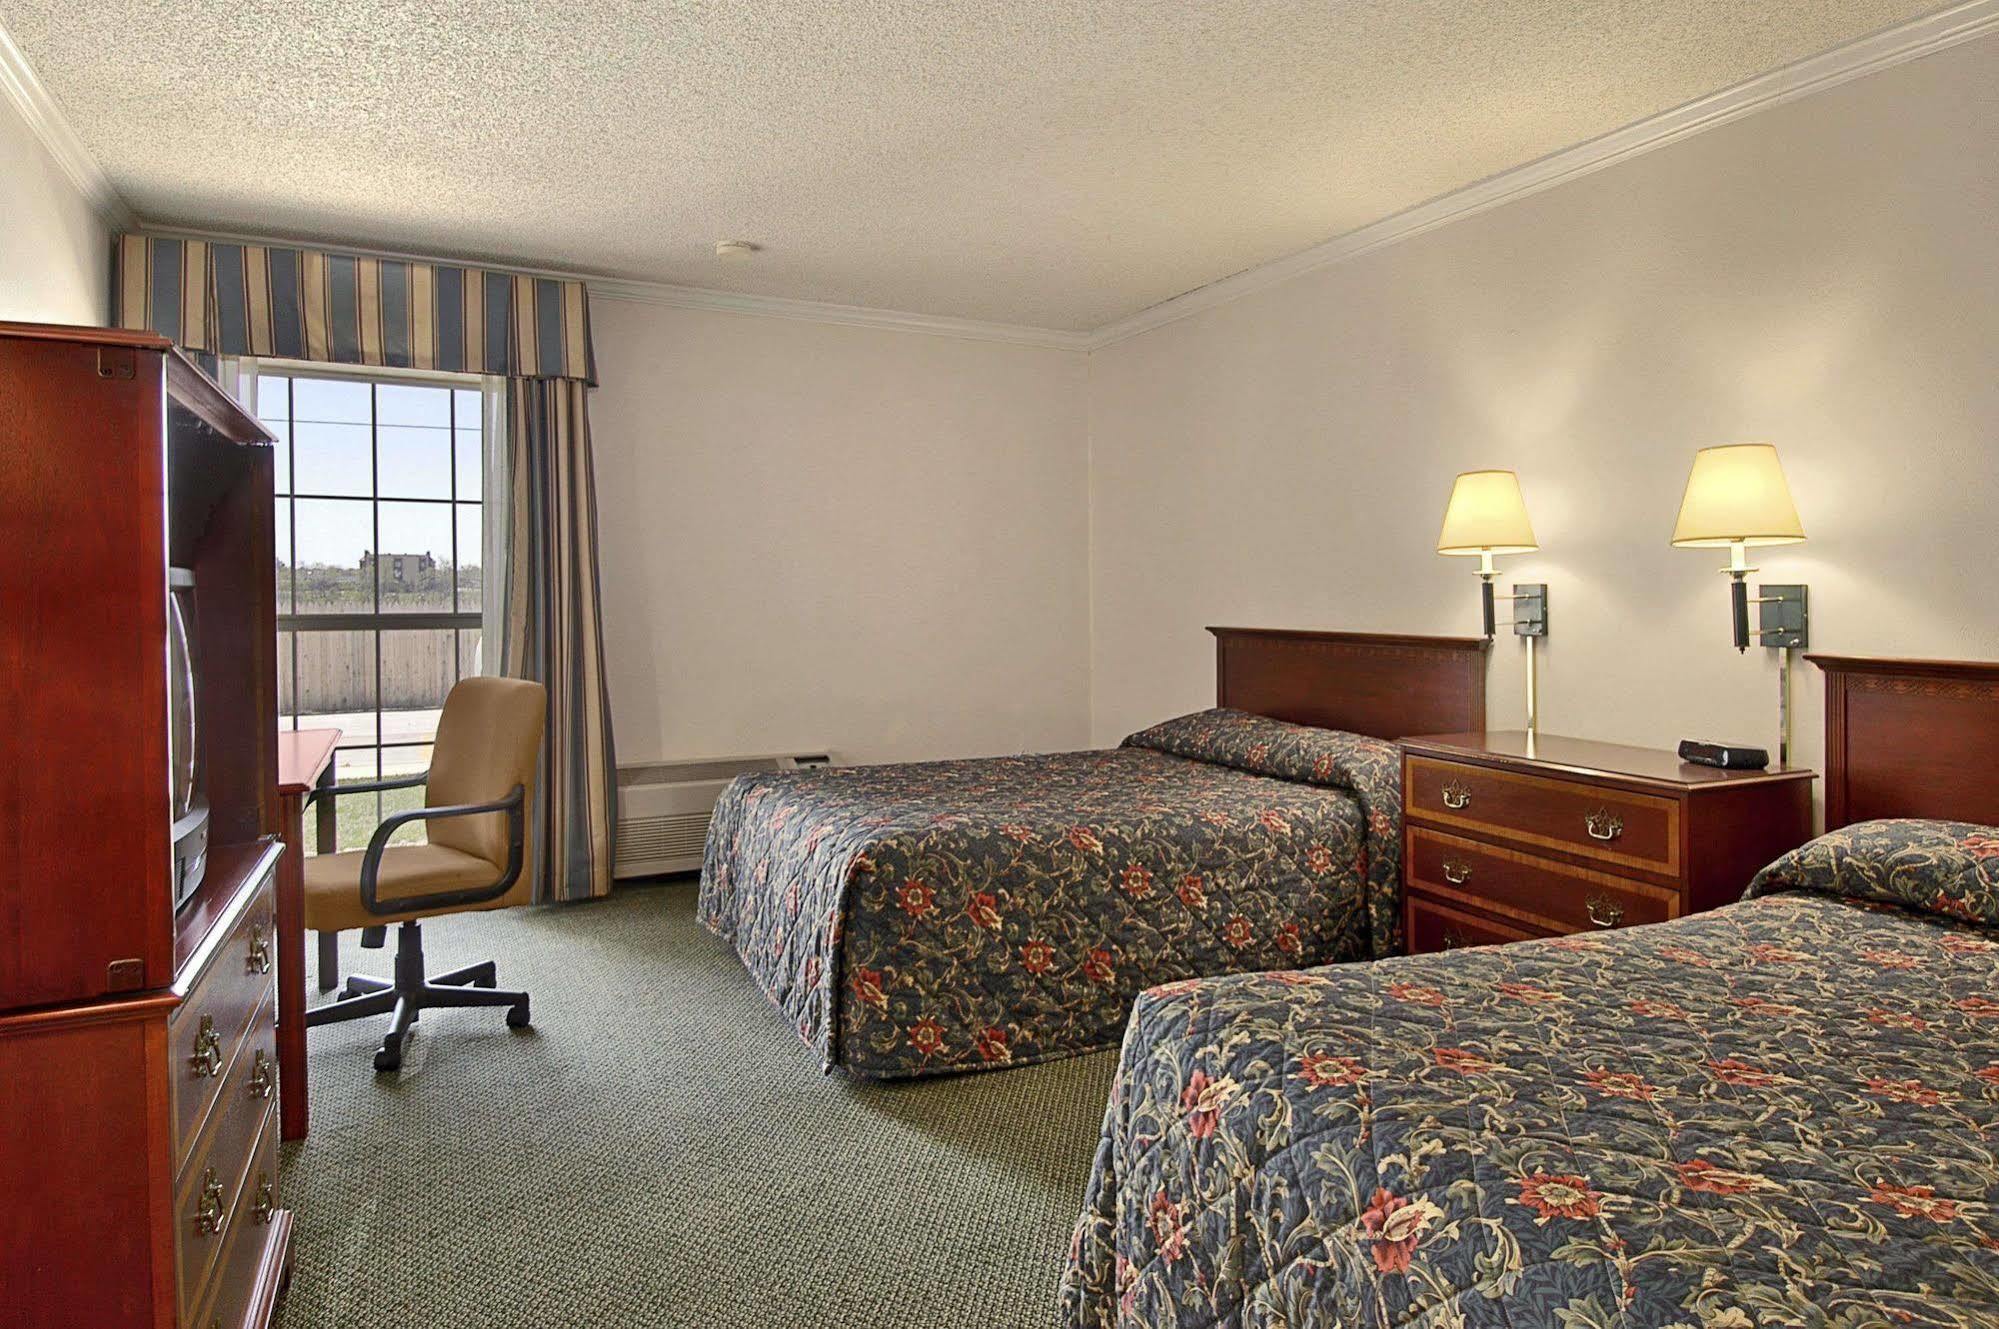 Extend-A-Suites - Extended Stay, I-40 Amarillo West Camera foto